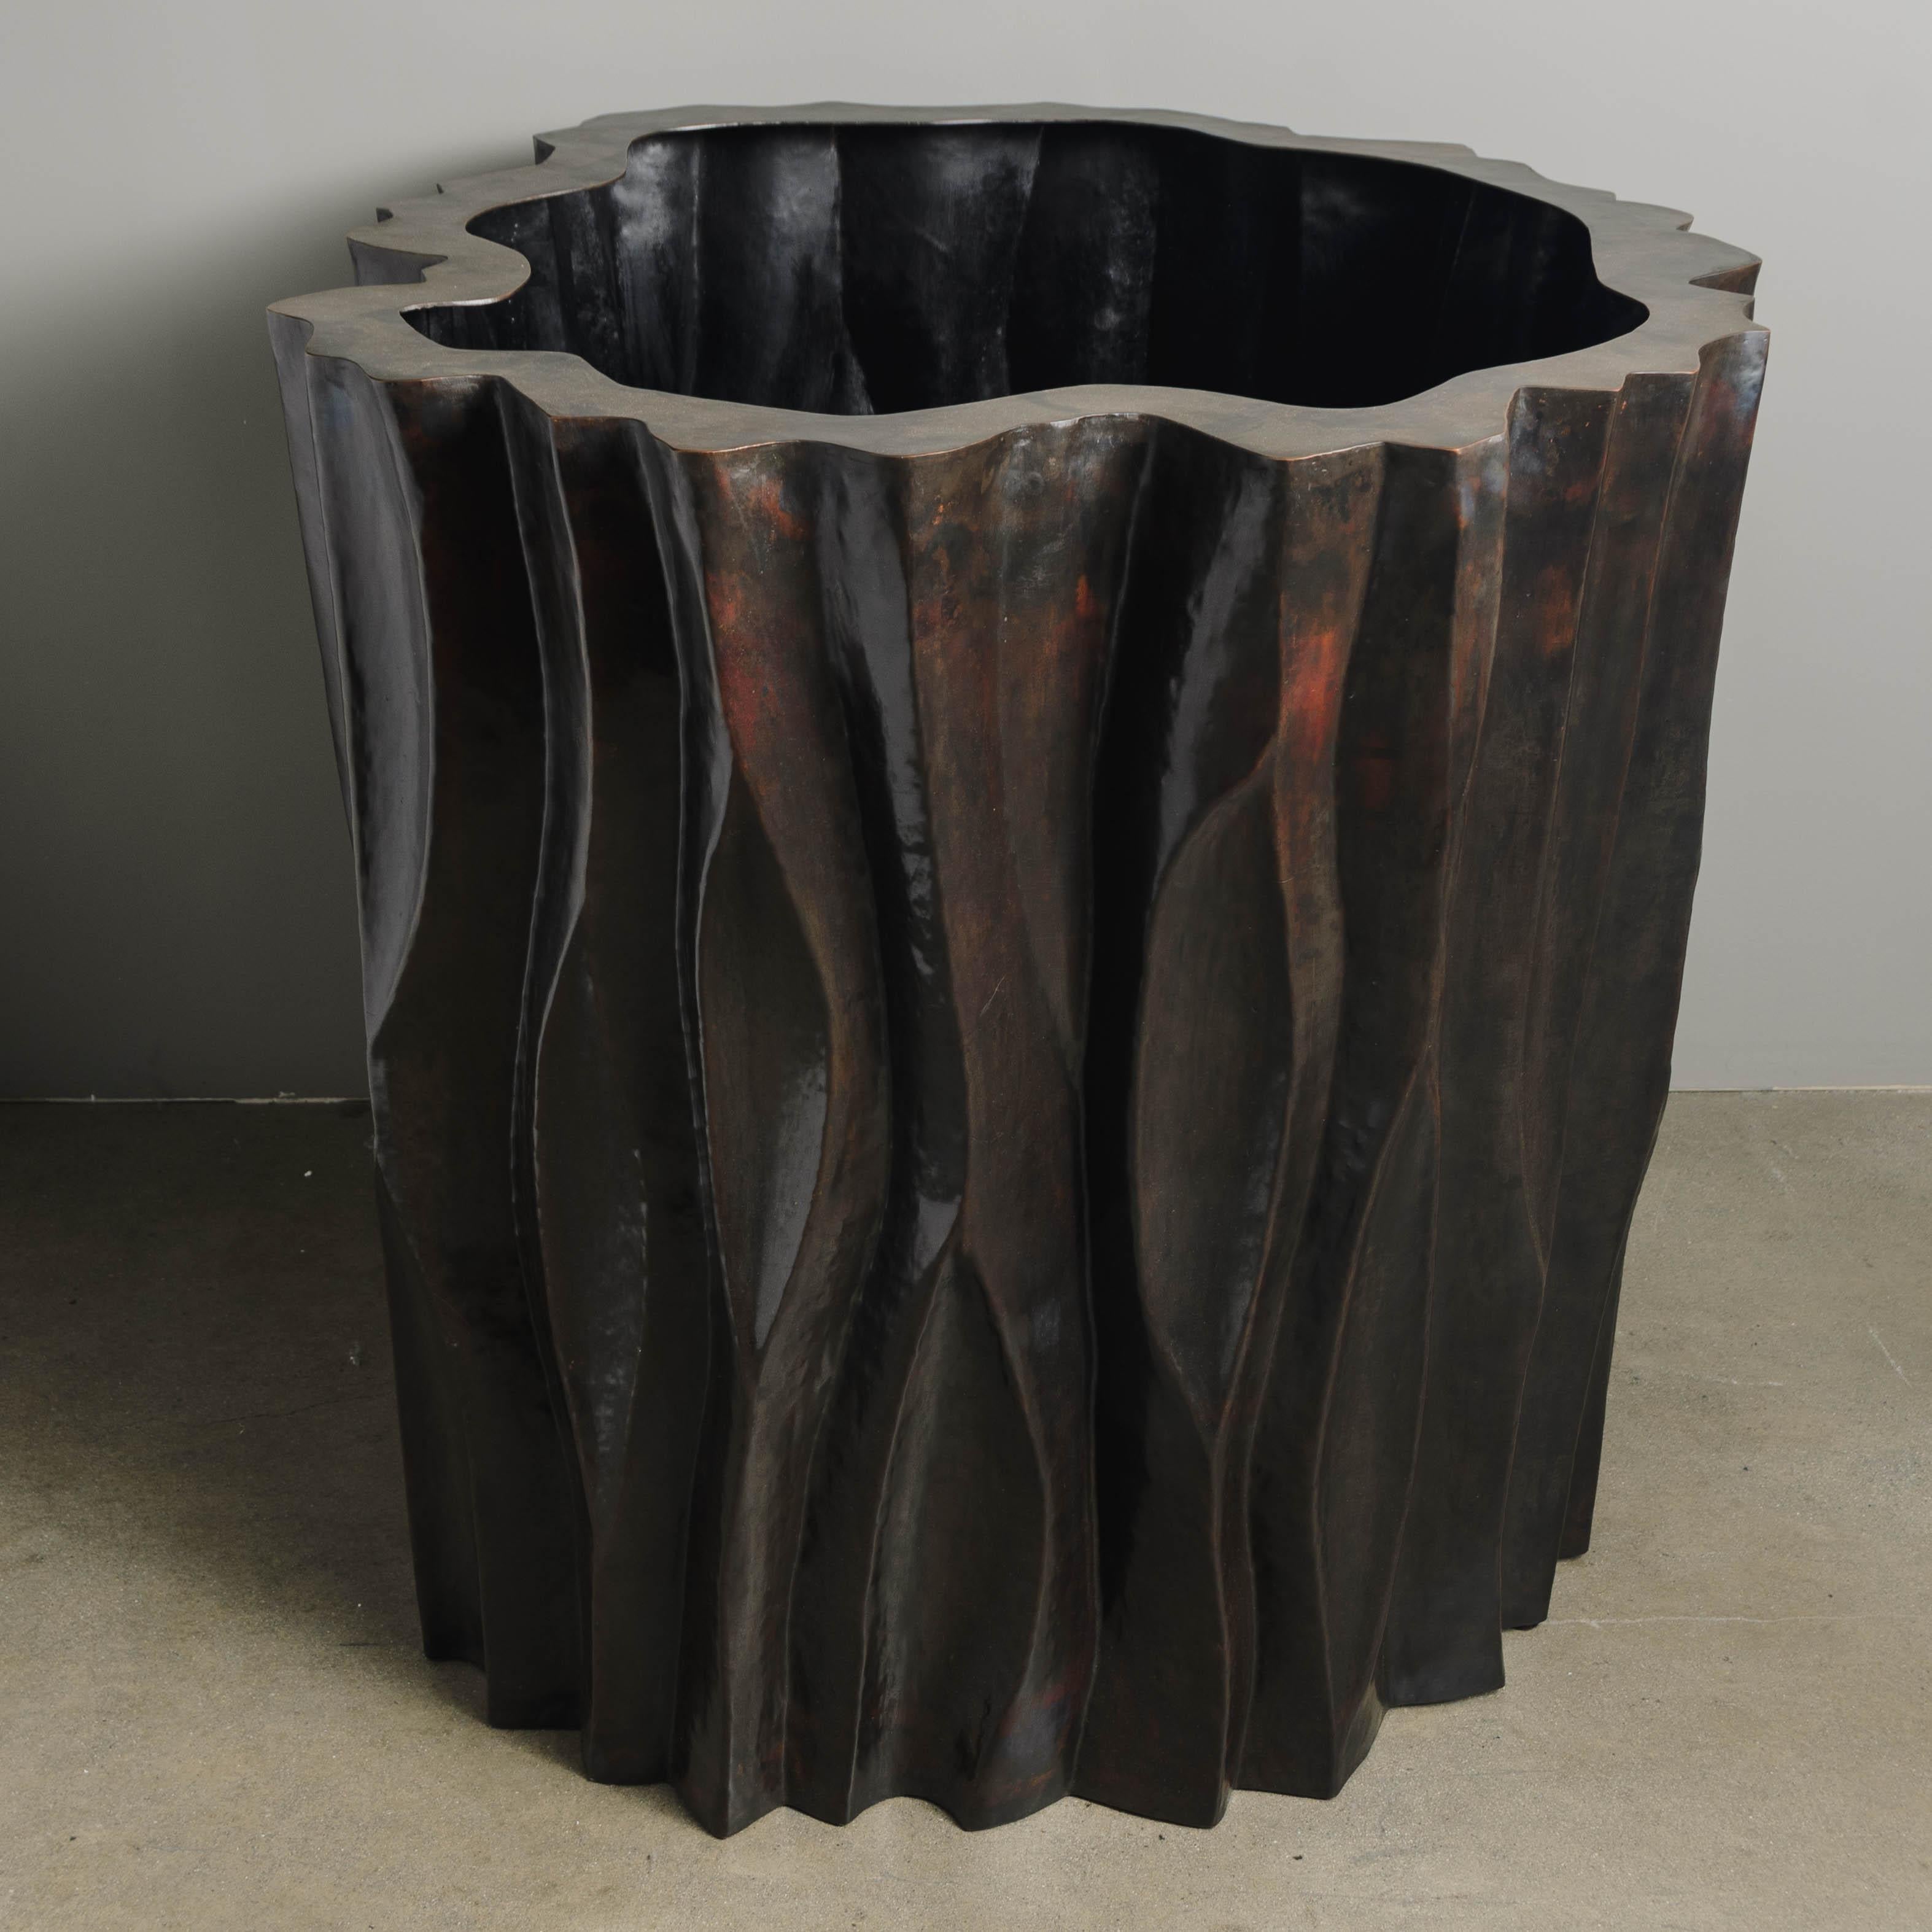 Large tree trunk design pot
Dark antique copper
Hand Repoussé
Limited Edition 
Each piece is individually crafted and is unique. 

Repoussé is the traditional art of hand-hammering decorative relief onto sheet metal. The technique originated